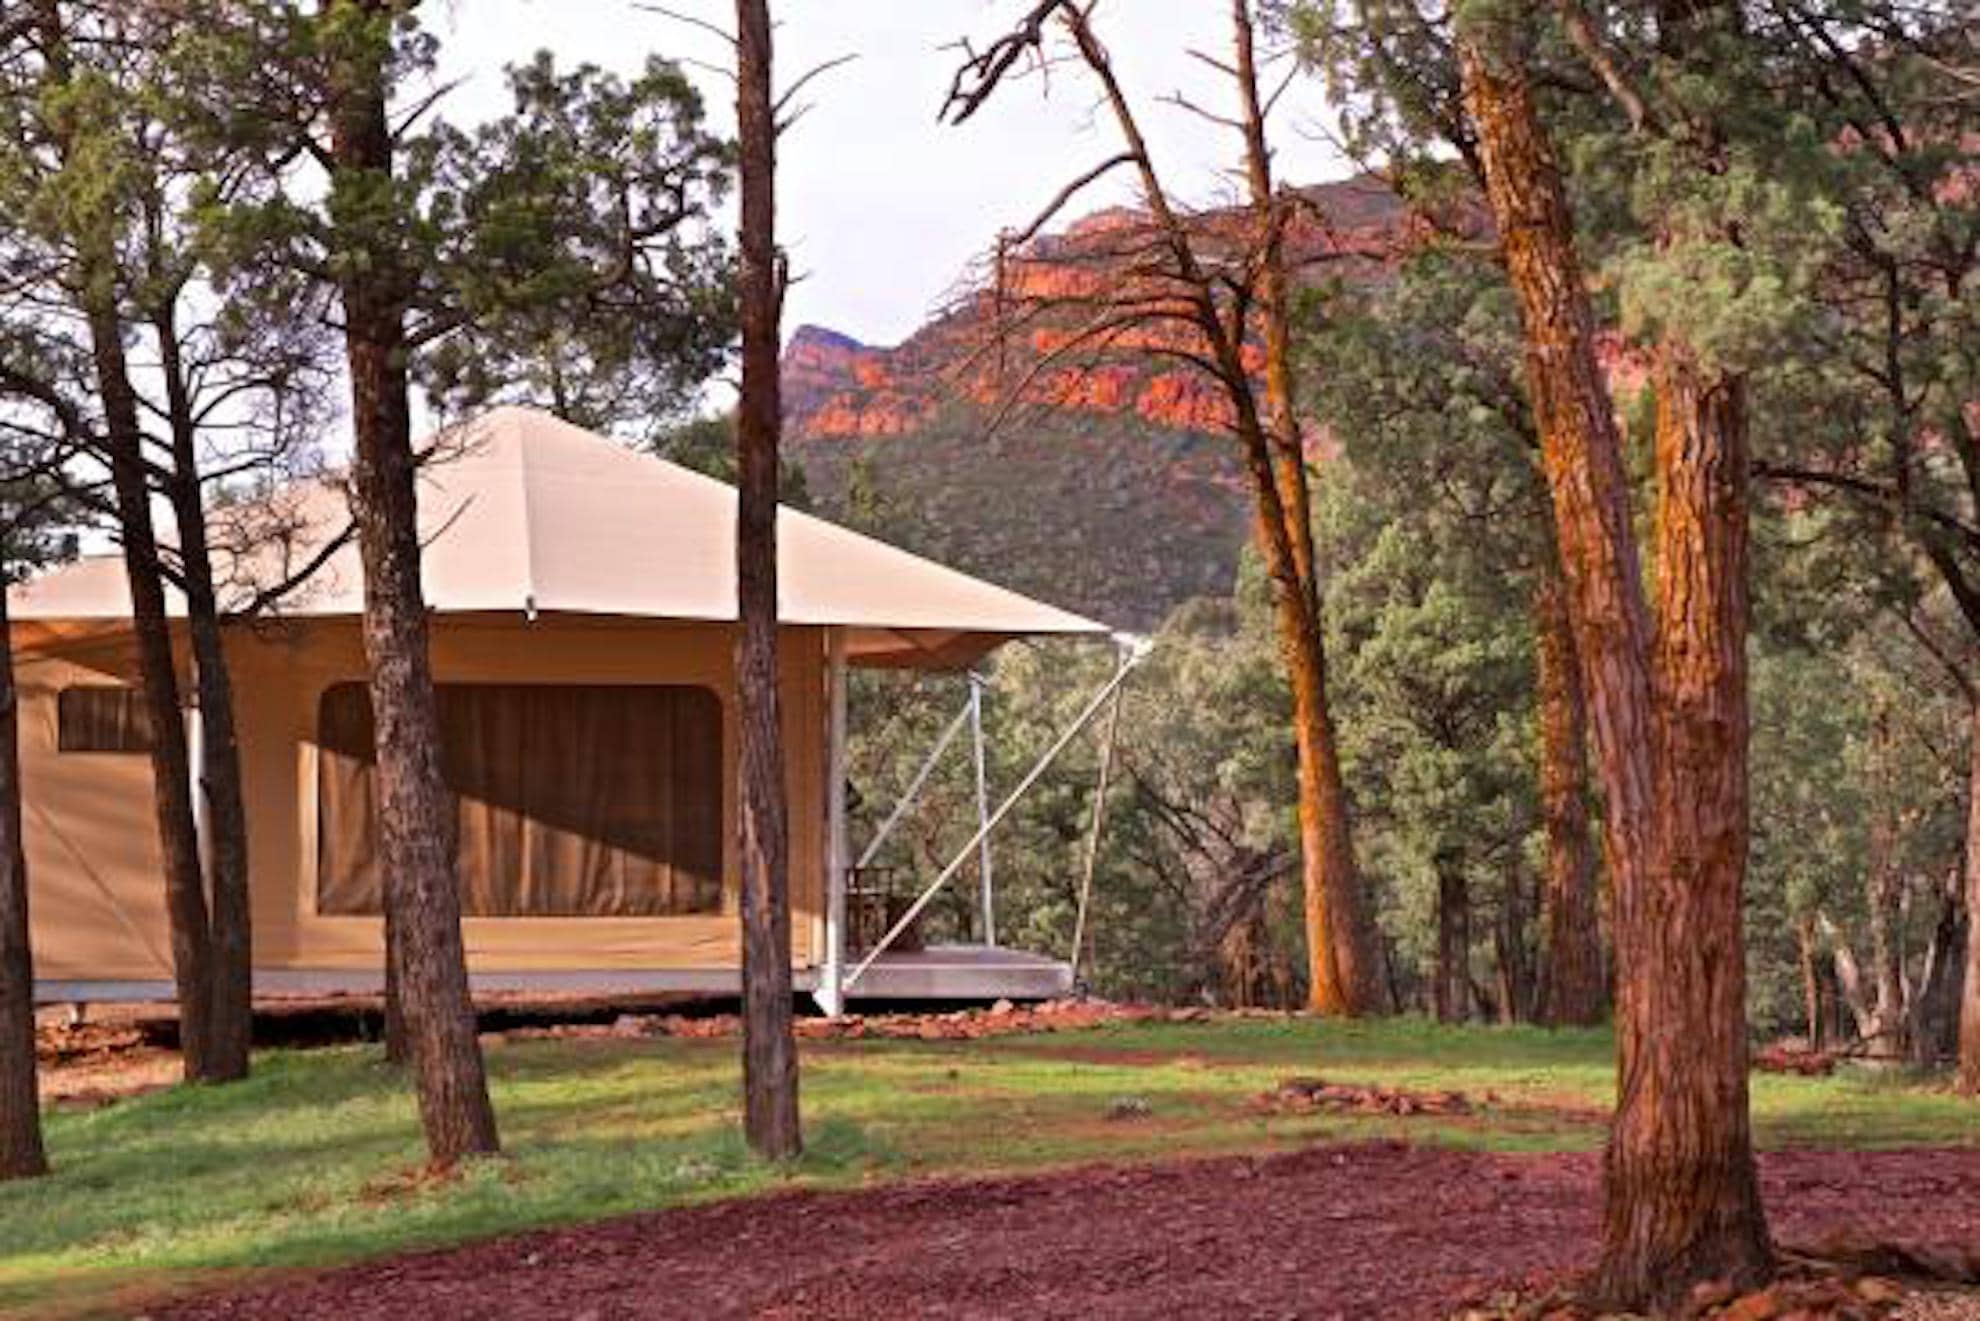 Safari Tent project by mdesign, a building design practice that operates on the Sunshine Coast.